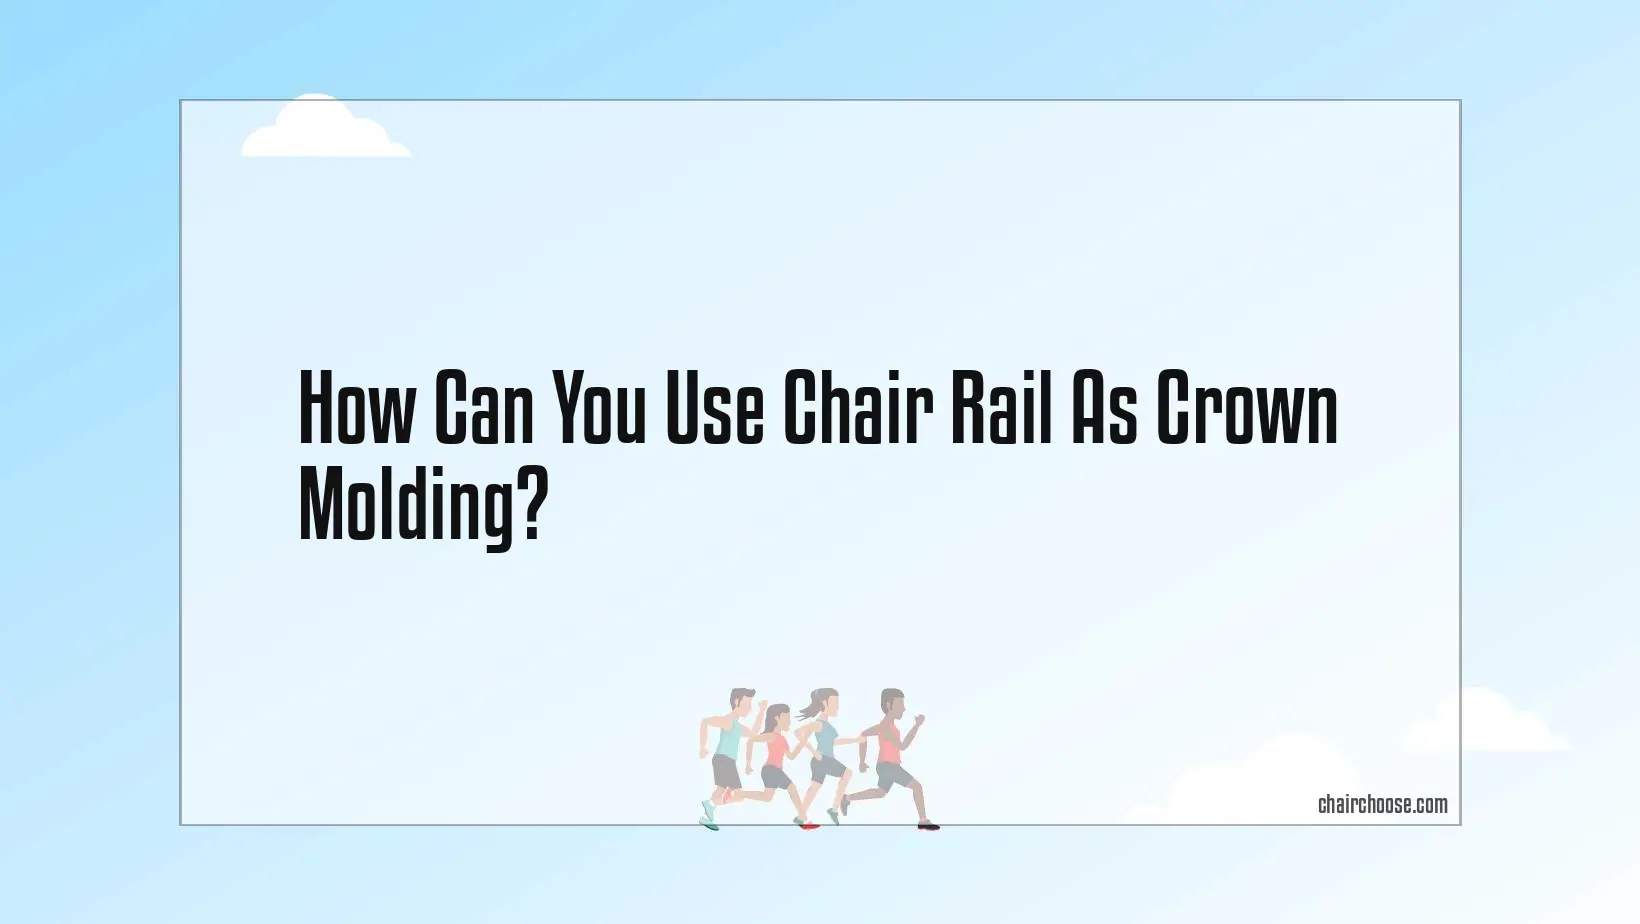 How Can You Use Chair Rail As Crown Molding?